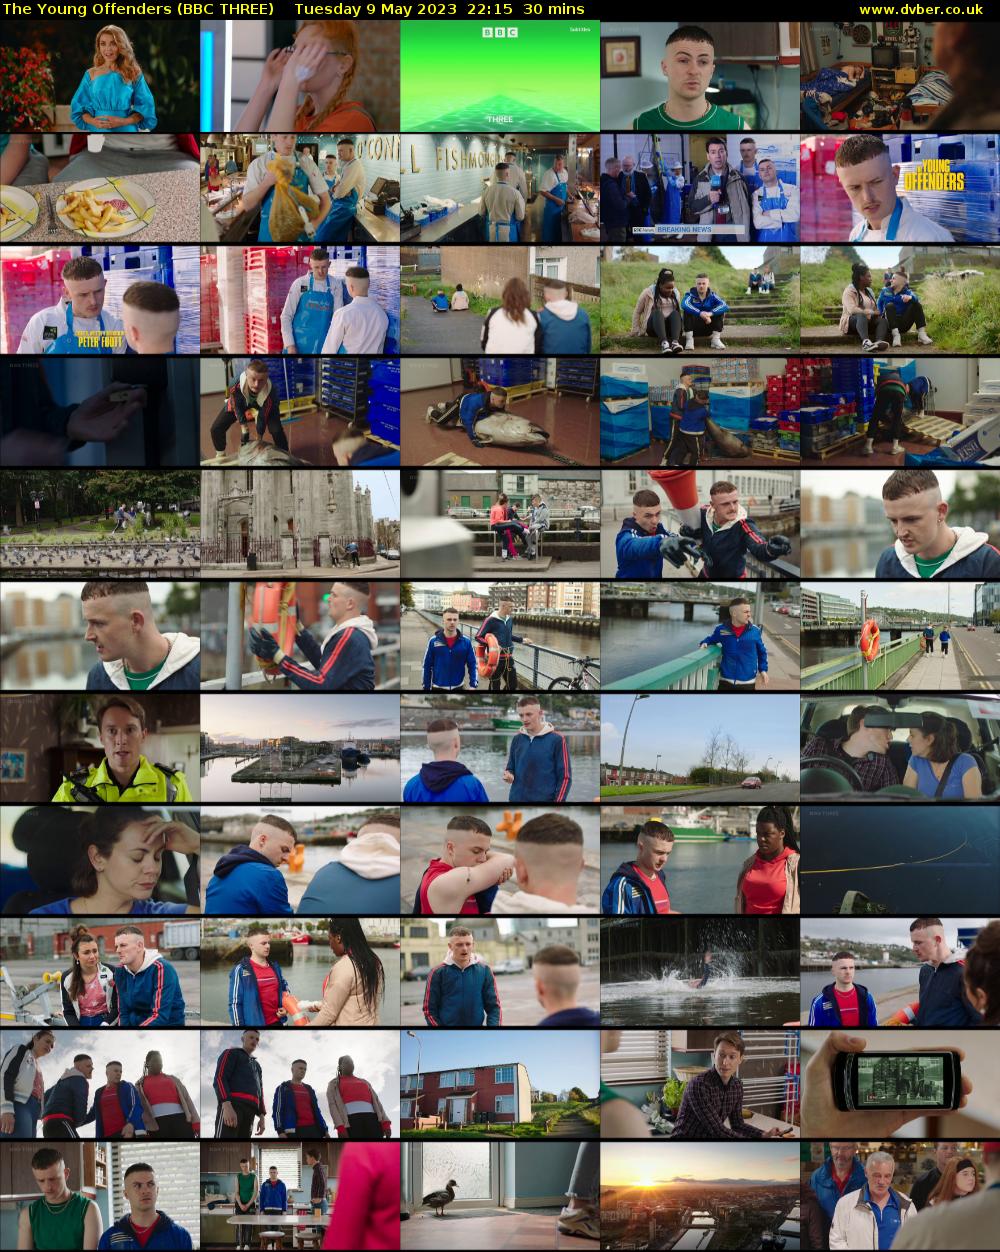 The Young Offenders (BBC THREE) Tuesday 9 May 2023 22:15 - 22:45